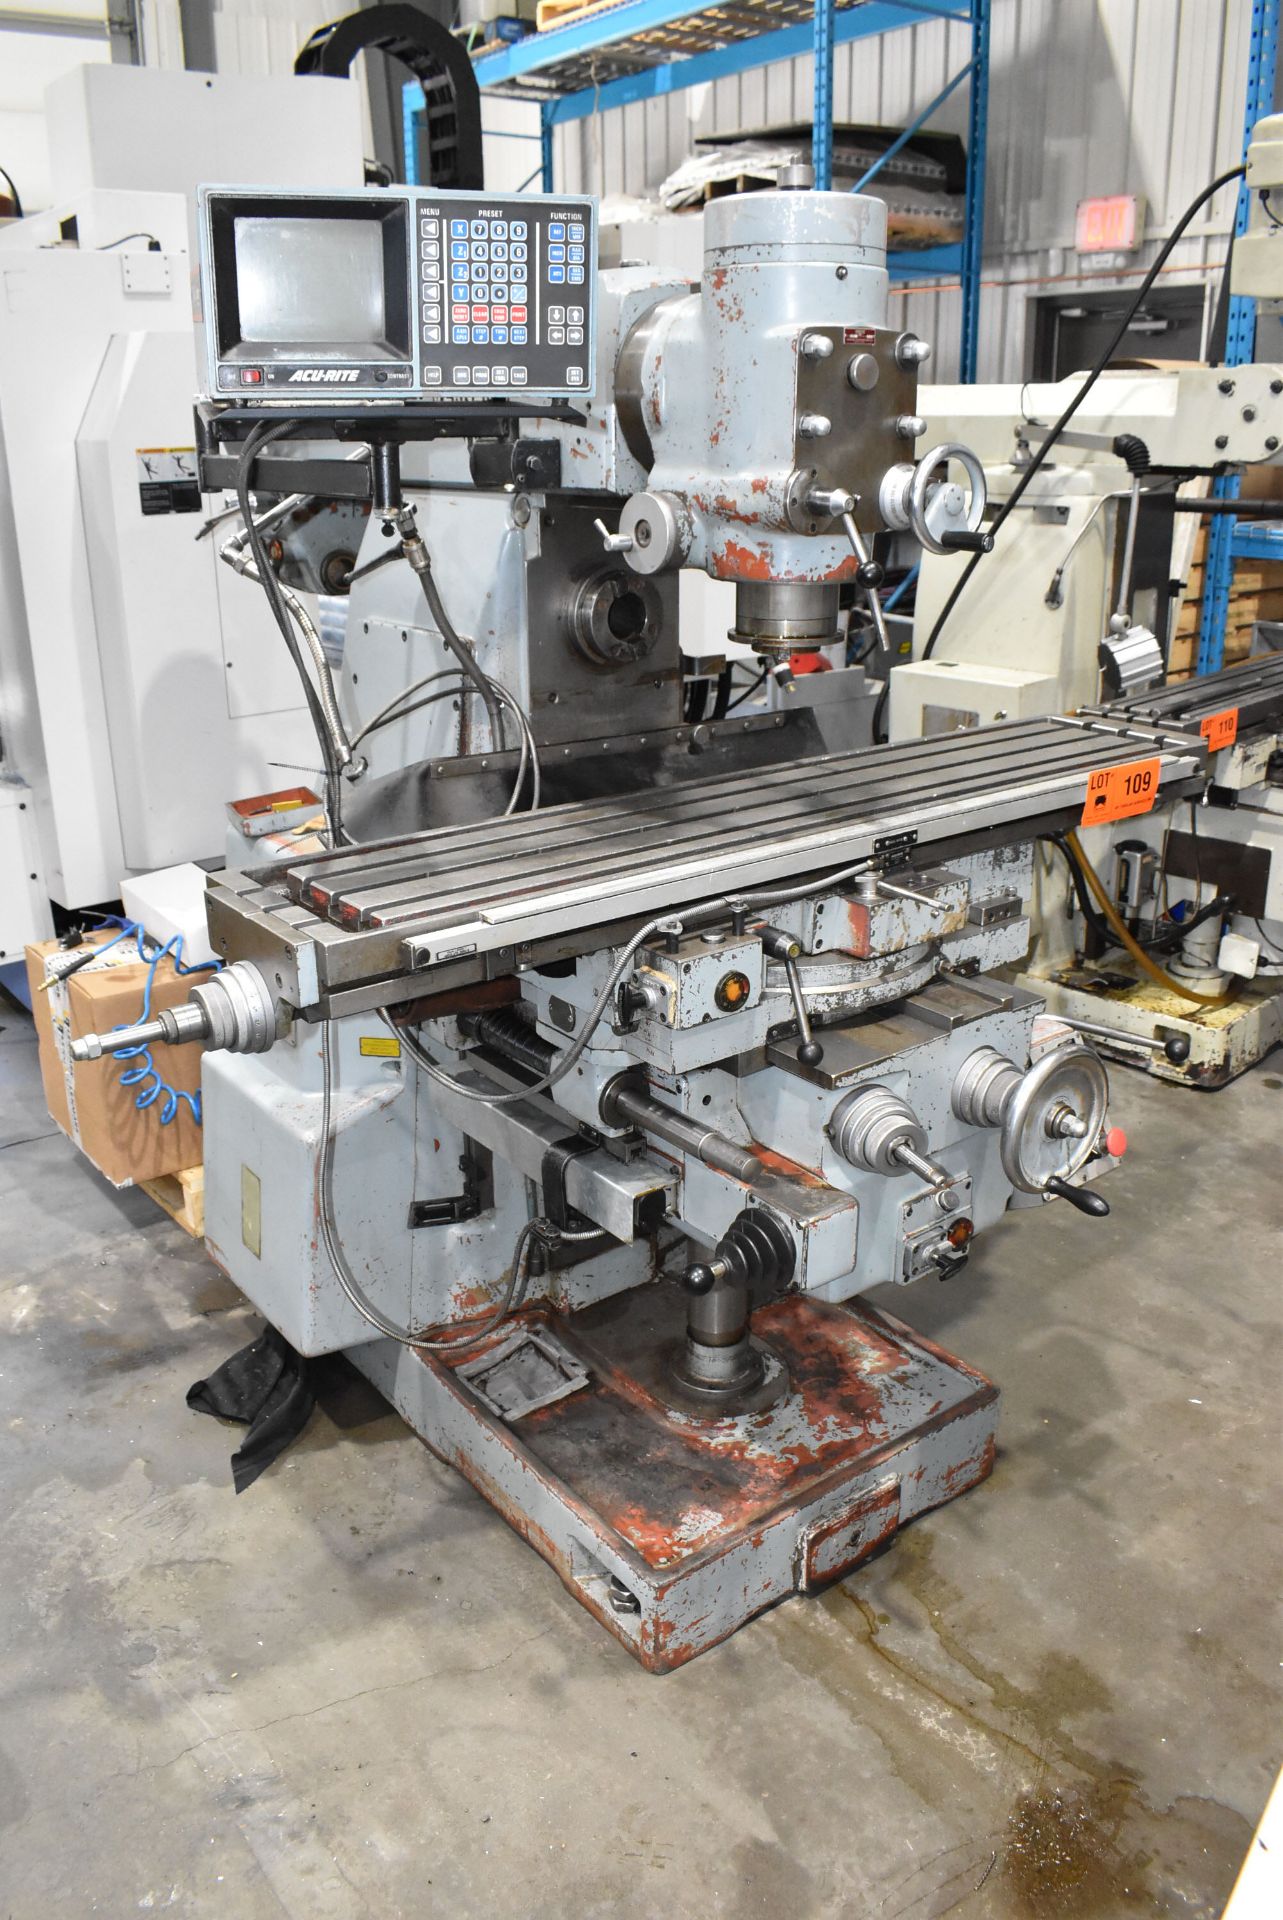 VARANMO U-2MM UNIVERSAL MILLING MACHINE WITH 12"X60" TABLE, VERTICAL SPINDLE SPEEDS TO 2400 RPM, - Image 3 of 13